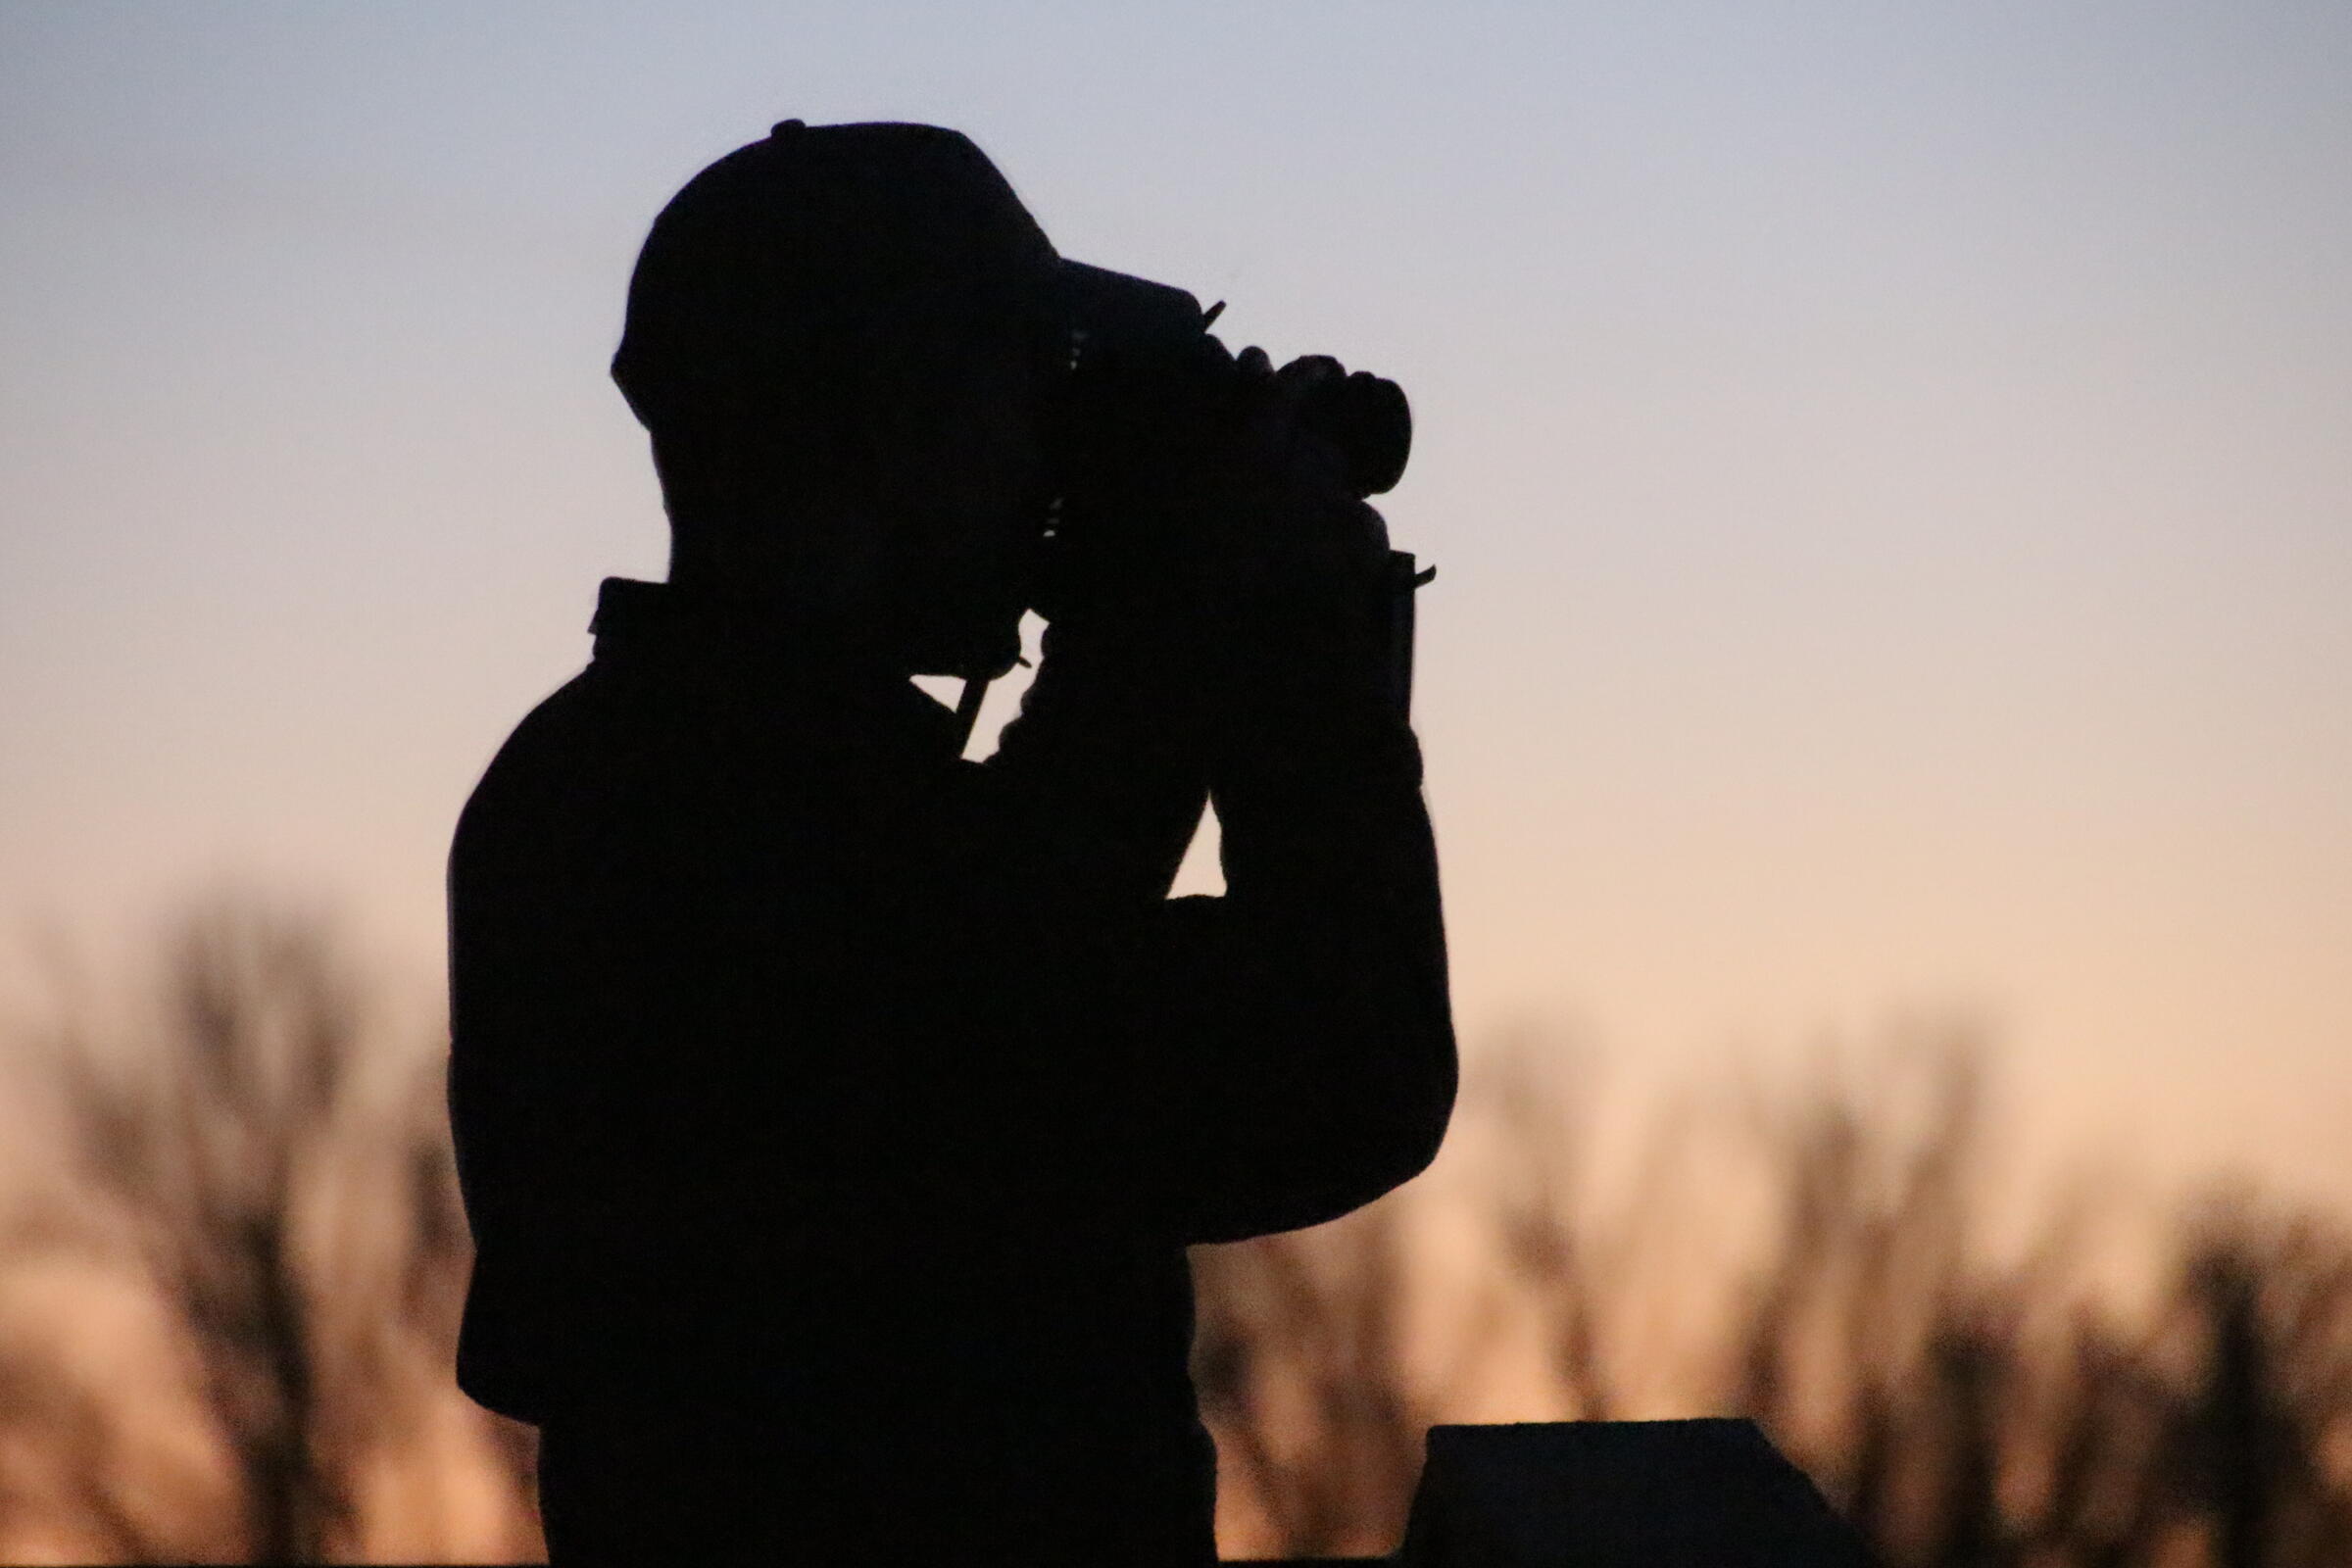 A birder wearing a baseball cap and looking through binoculars is backlit by a blue and pink sunset.